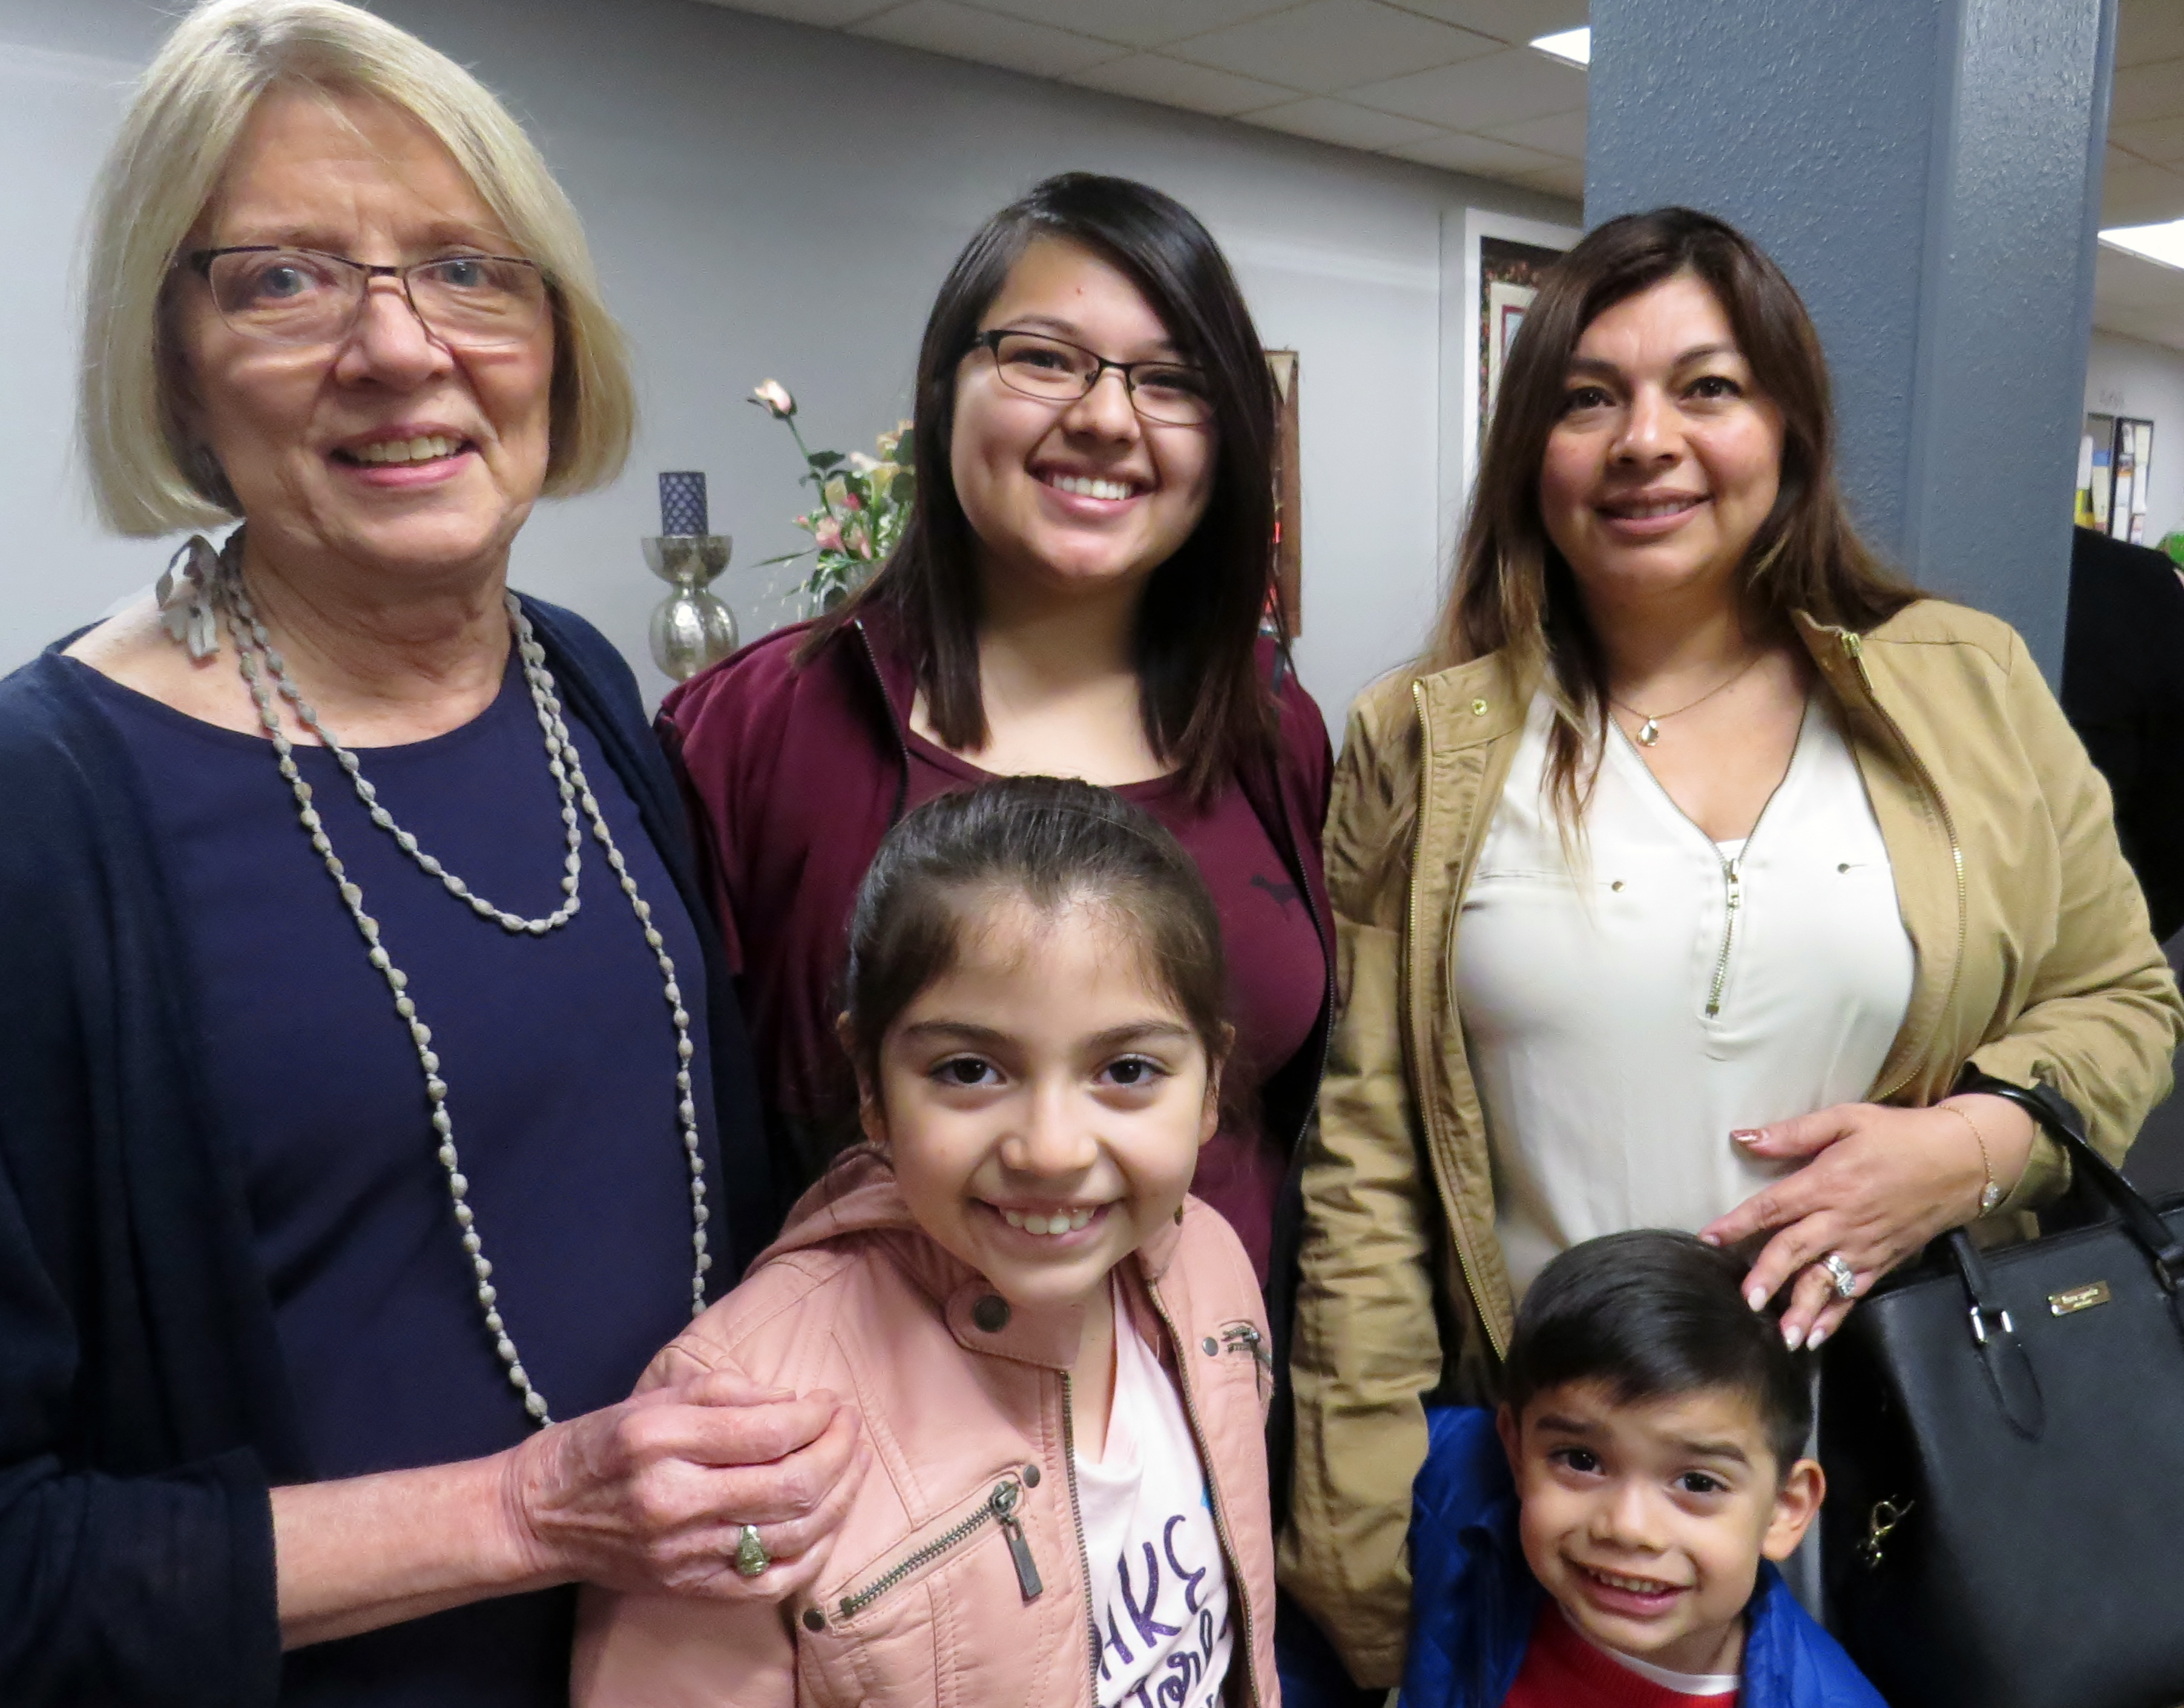 Kay Schecht has been a mentor to three generations of the Lopez family in Irving, Texas. She stands with Dalia Lopez (far right) and Dalia’s daughter, Selena, and in front are Selena’s children Mia, 8, and Ethan, 4. Schecht received the Foundation for Evangelism’s Distinguished Evangelist Award in recognition of more than 20 years of service to at-risk children and youth. Photo by Sam Hodges, UMNS.